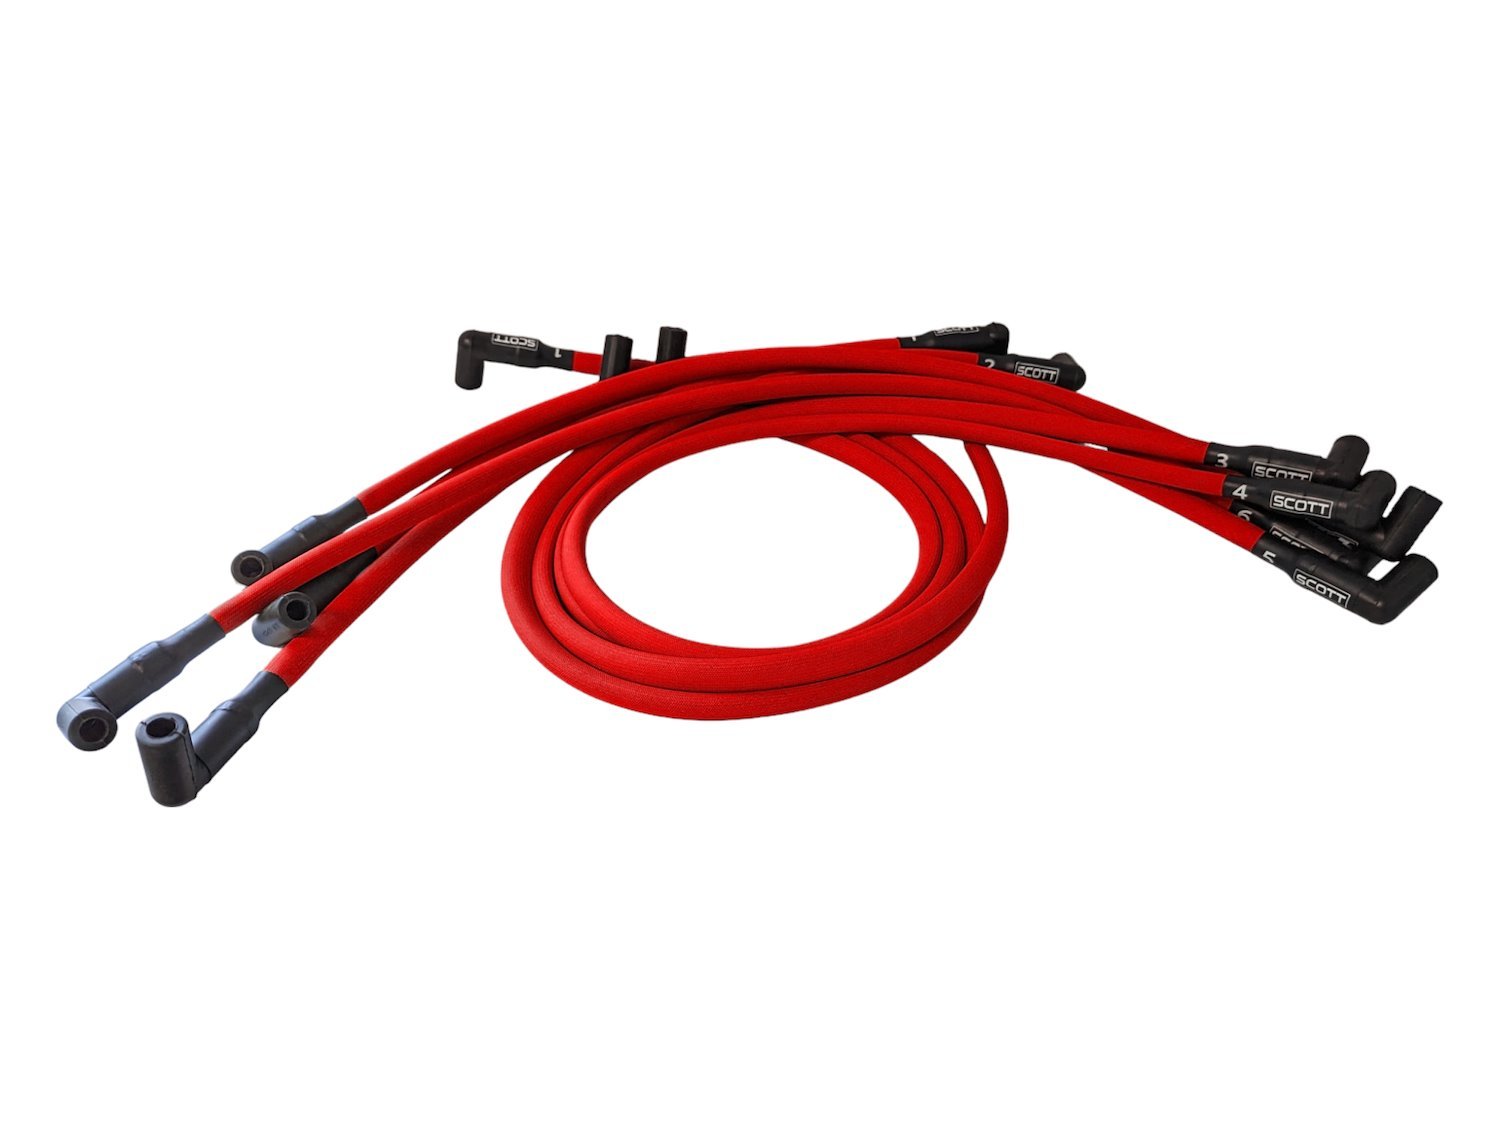 SPW-PS-430-2 High-Performance Fiberglass-Oversleeved Spark Plug Wire Set for Big Block Ford, Under Header [Red]